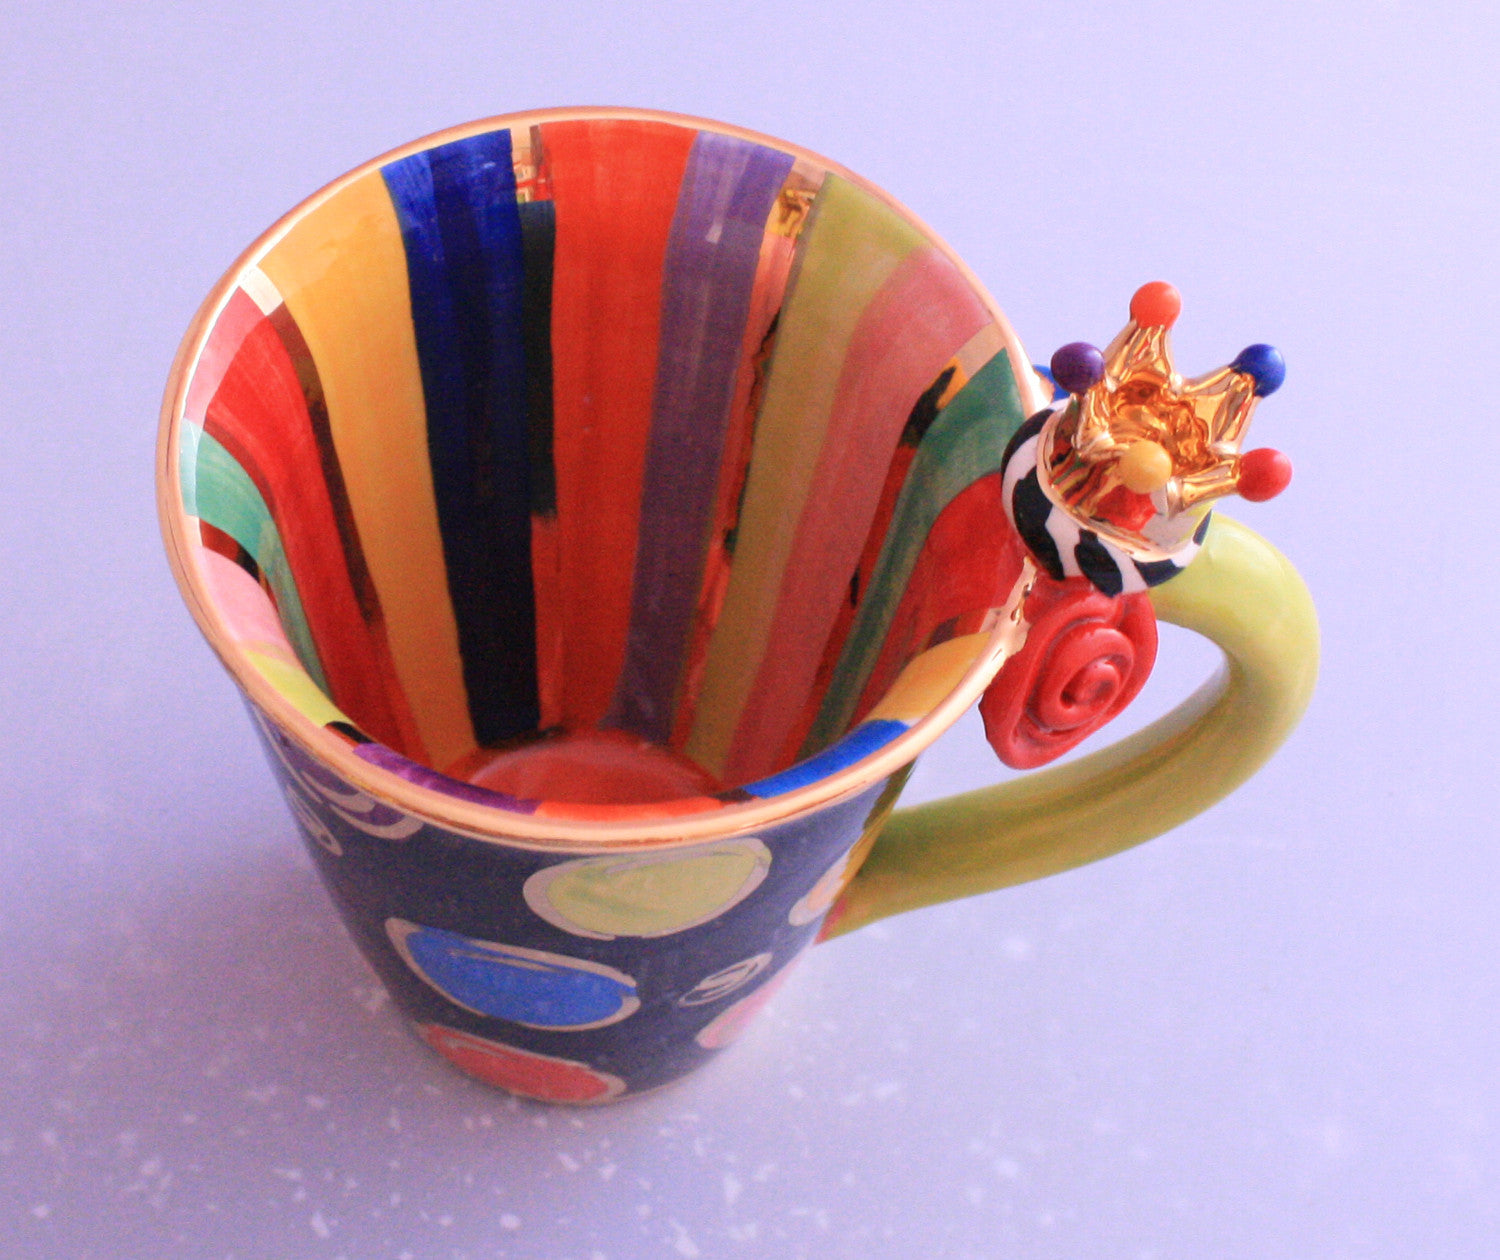 Crown Mug Smartie and Stripes - MaryRoseYoung